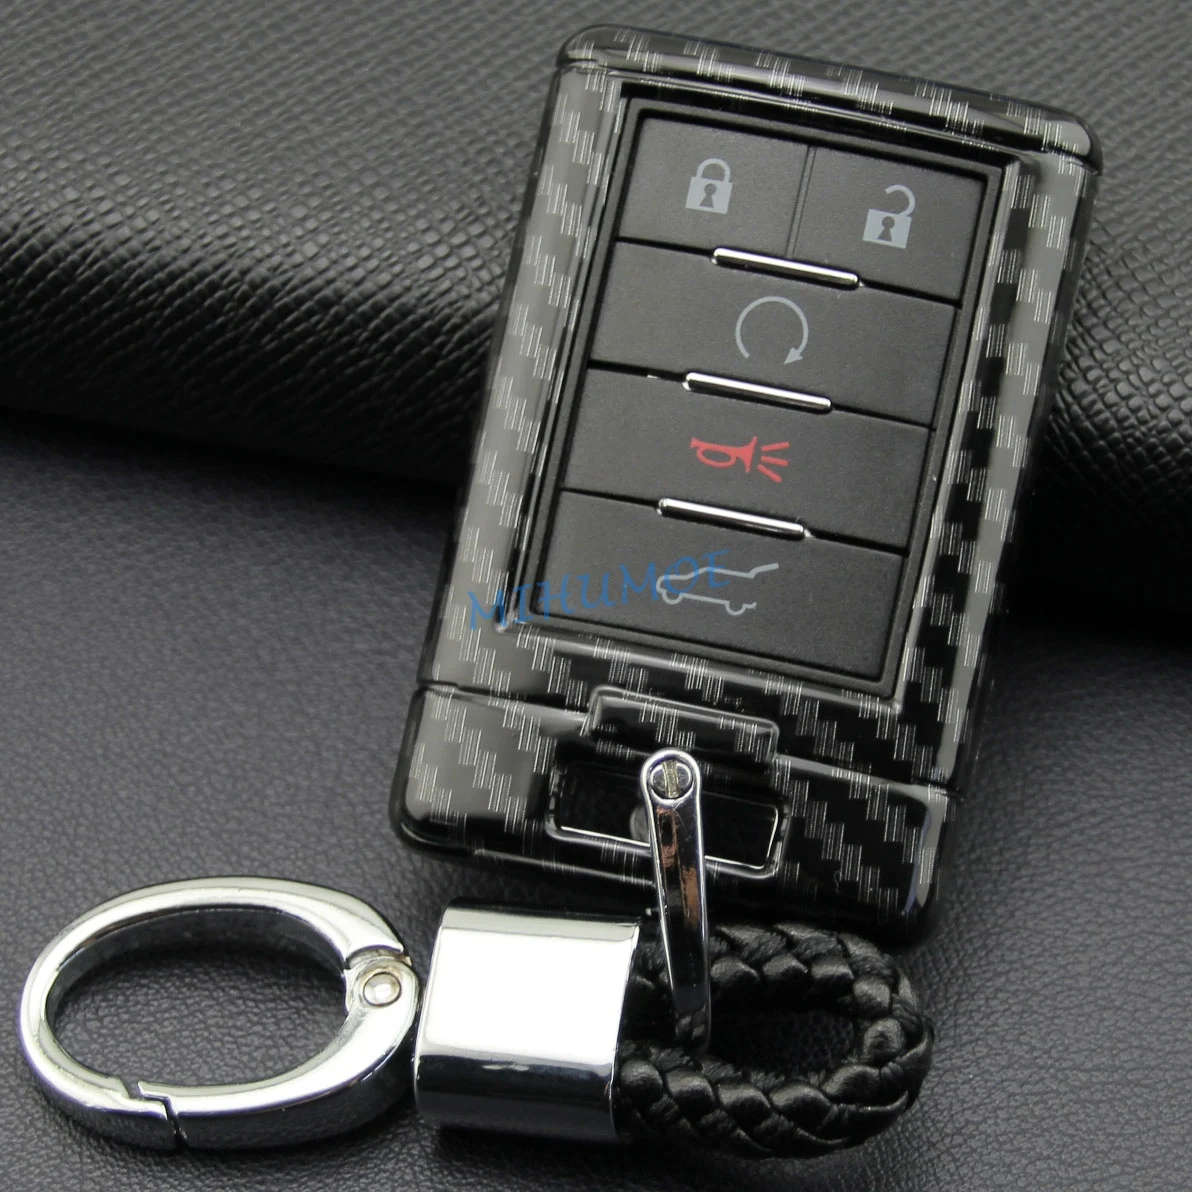 5 Buttons Remote Key Fob Cover Shell for Cadillac ATS SRX DTS CTS STS XTS 